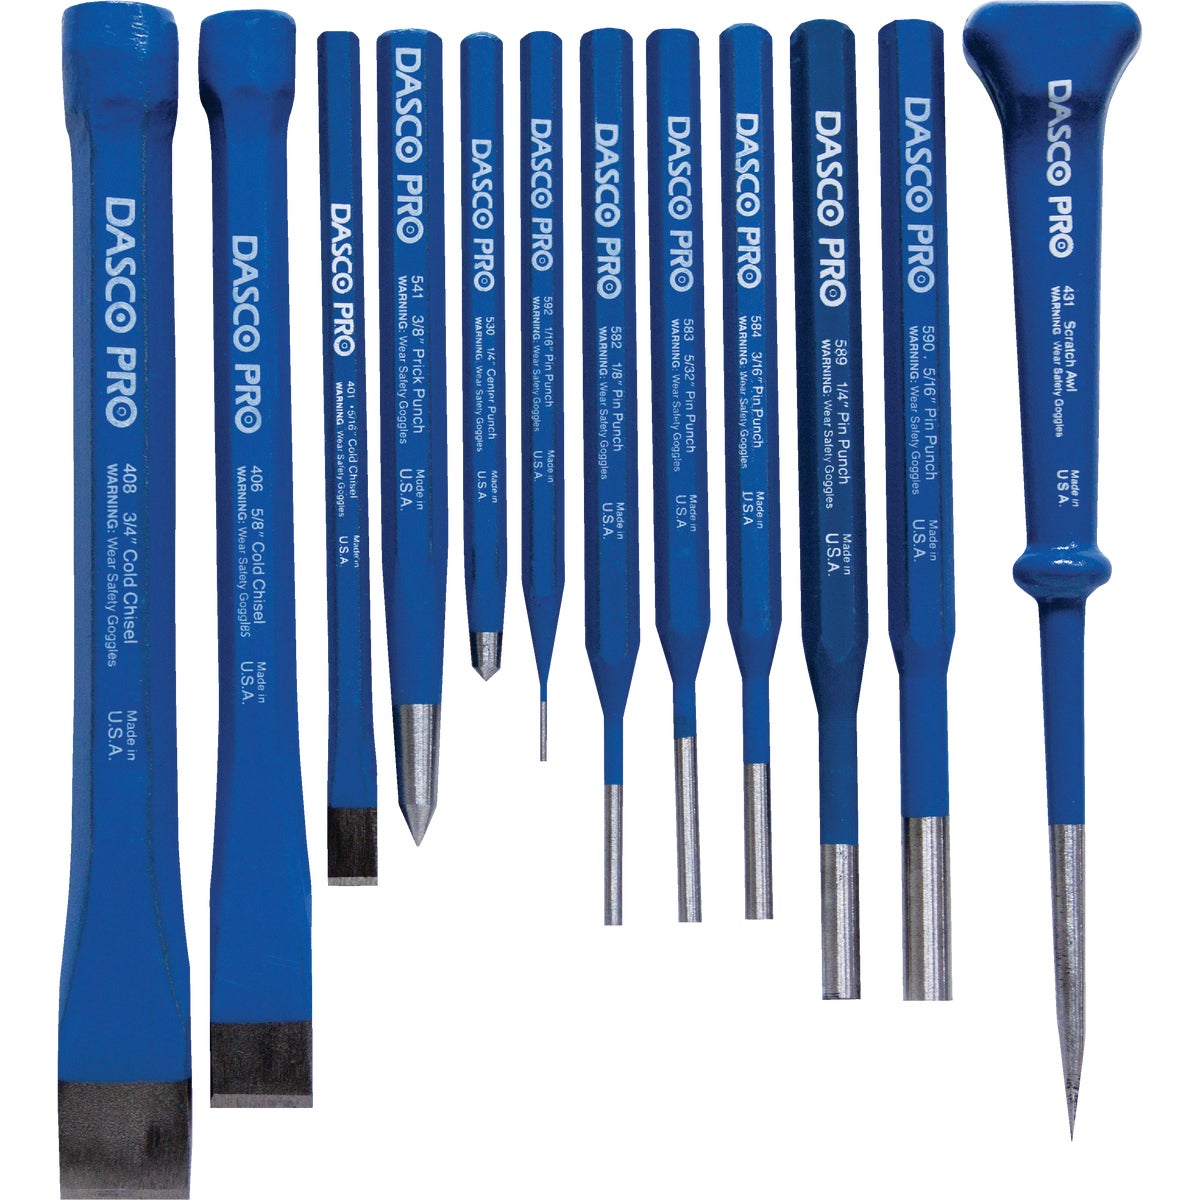 Item 372846, The Mayhew 12 Piece Punch and Chisel set has an assortment of punches, 